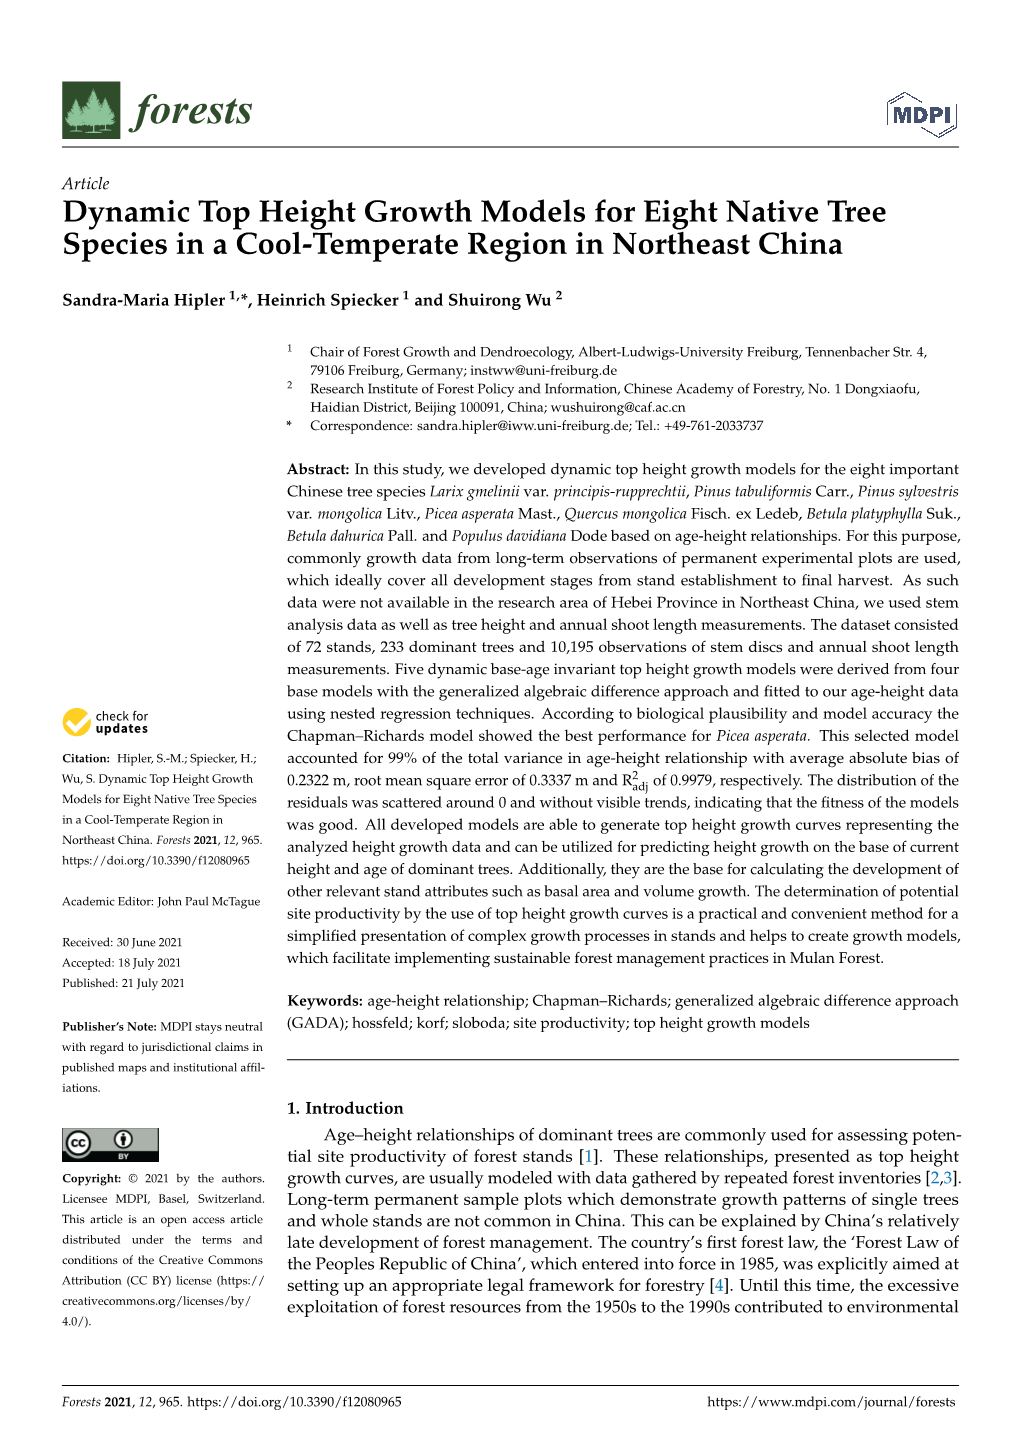 Dynamic Top Height Growth Models for Eight Native Tree Species in a Cool-Temperate Region in Northeast China